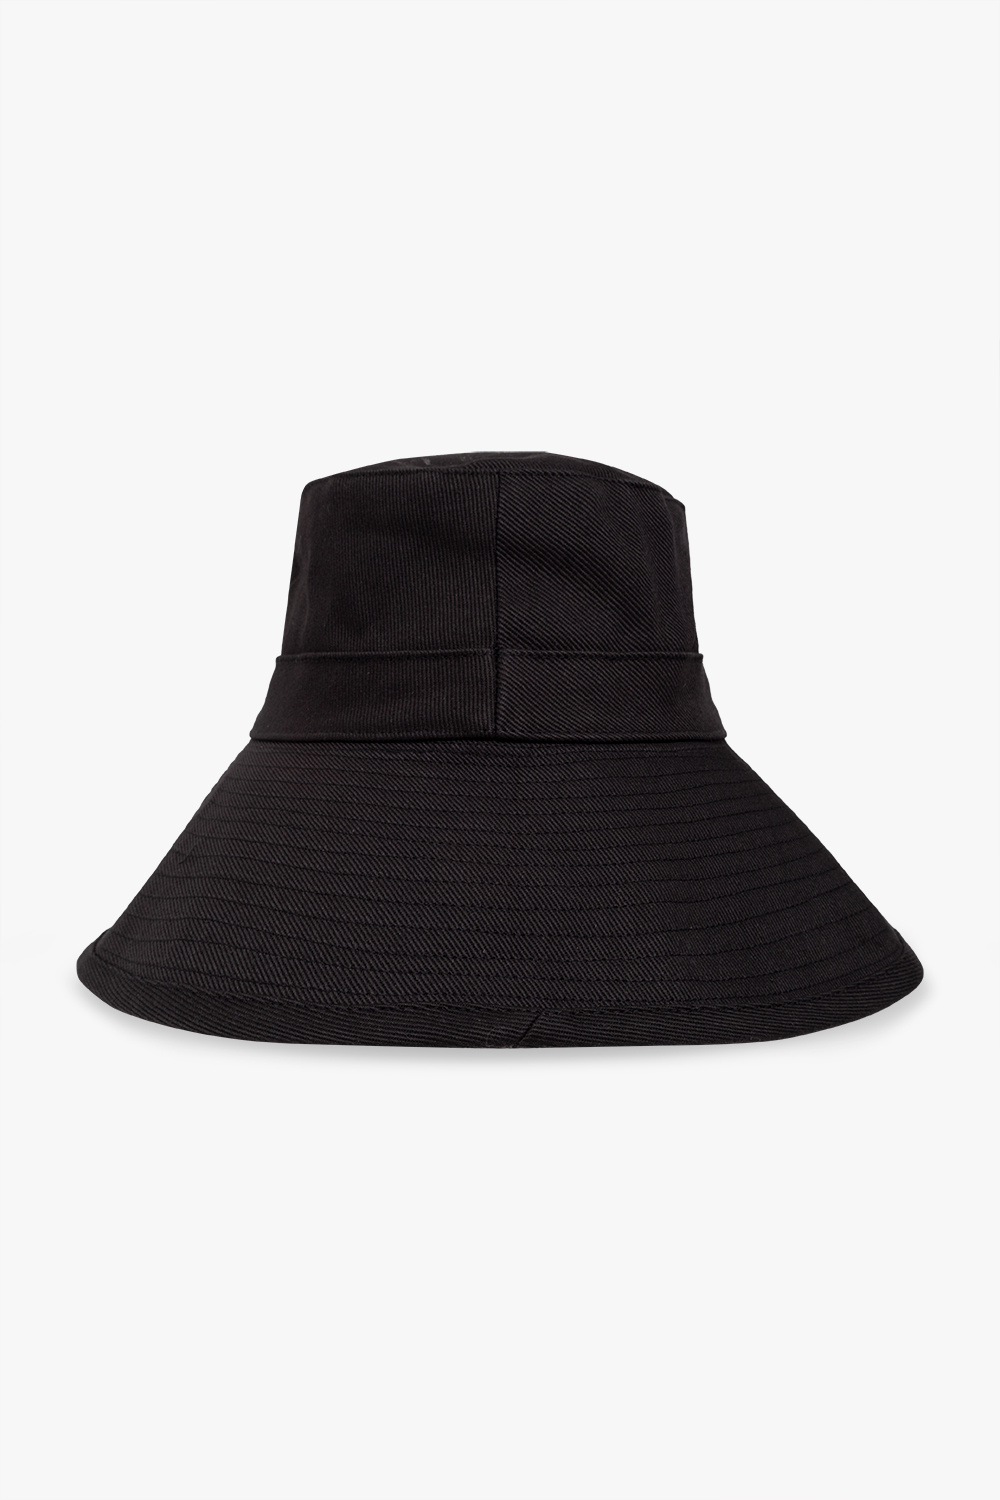 Jacquemus ‘Linu’ bucket hat with logo